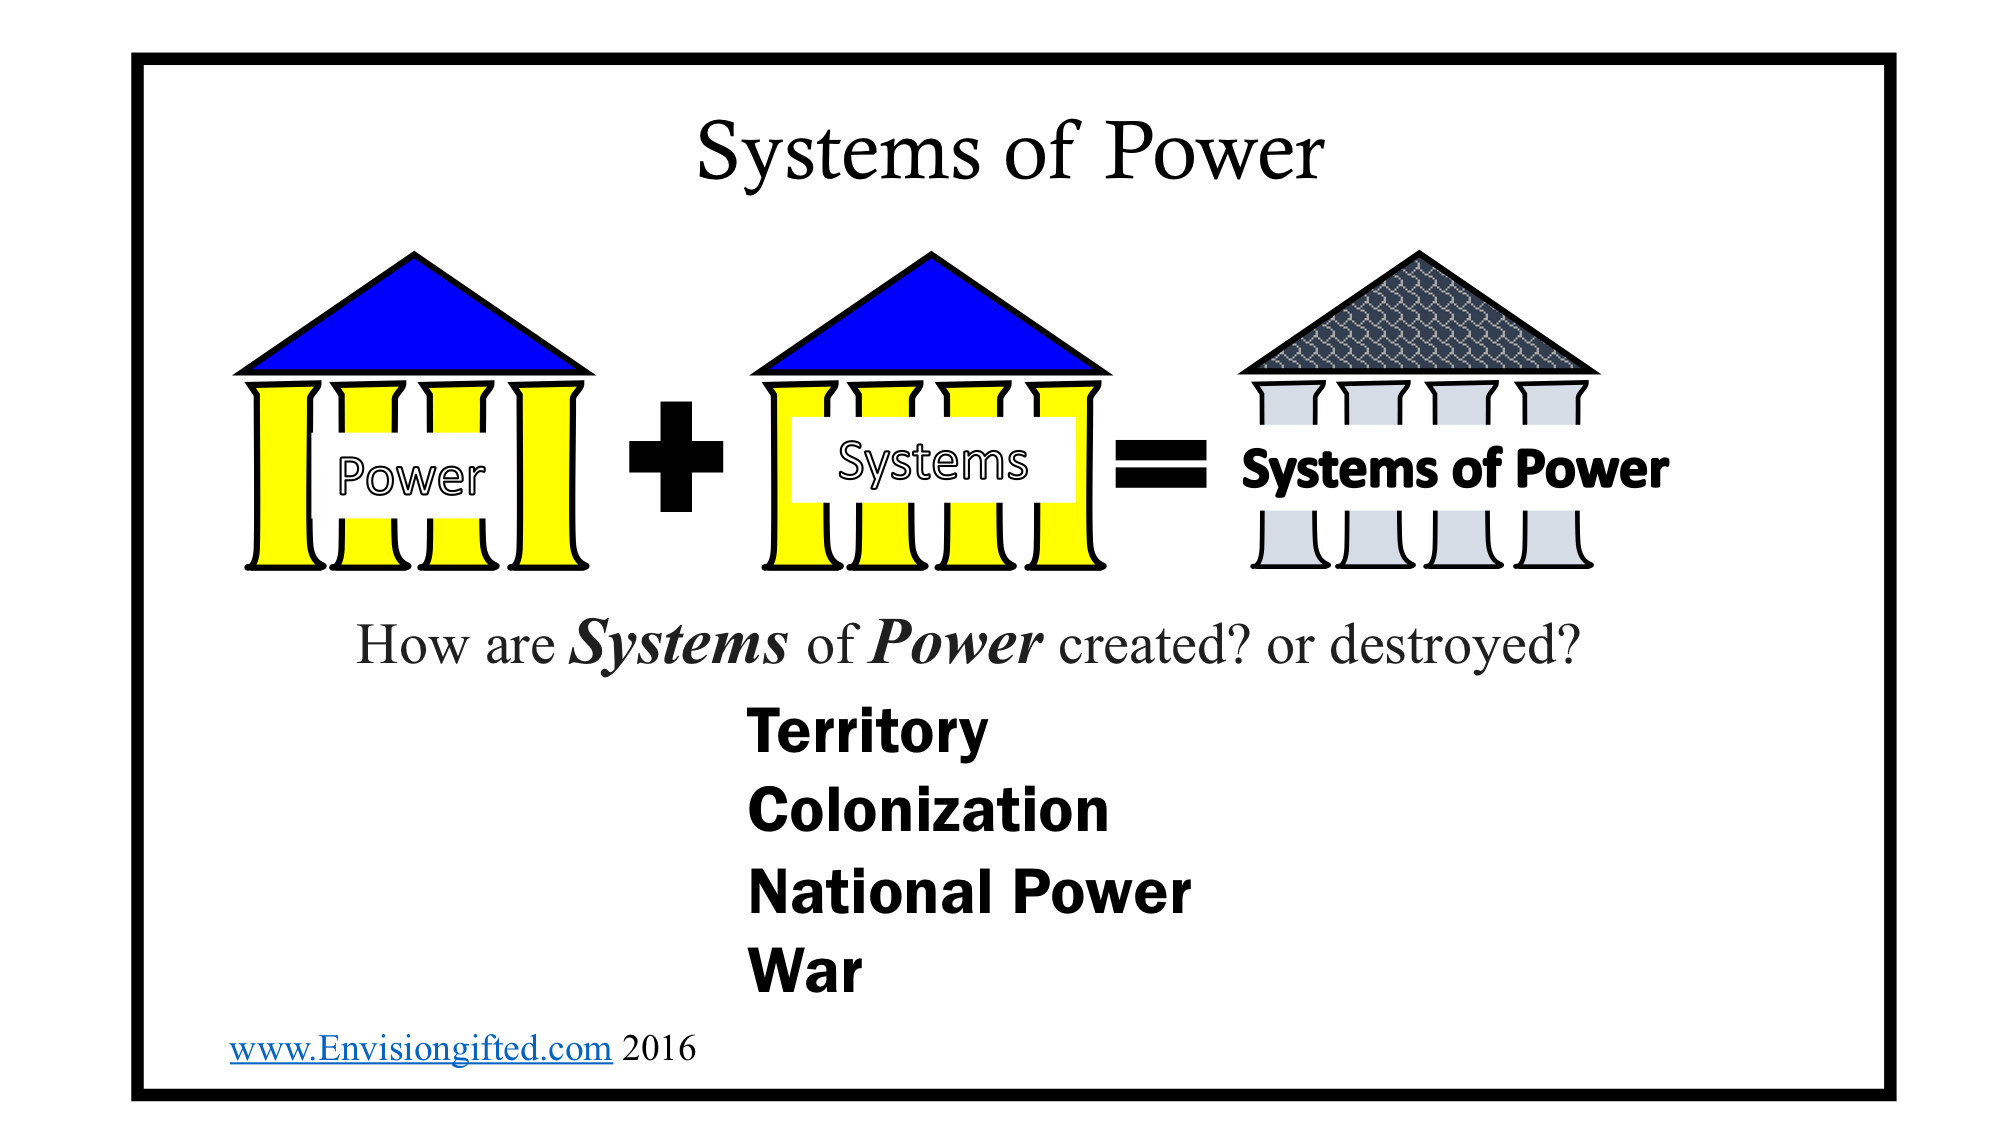 Universal Theme- Systems of Power